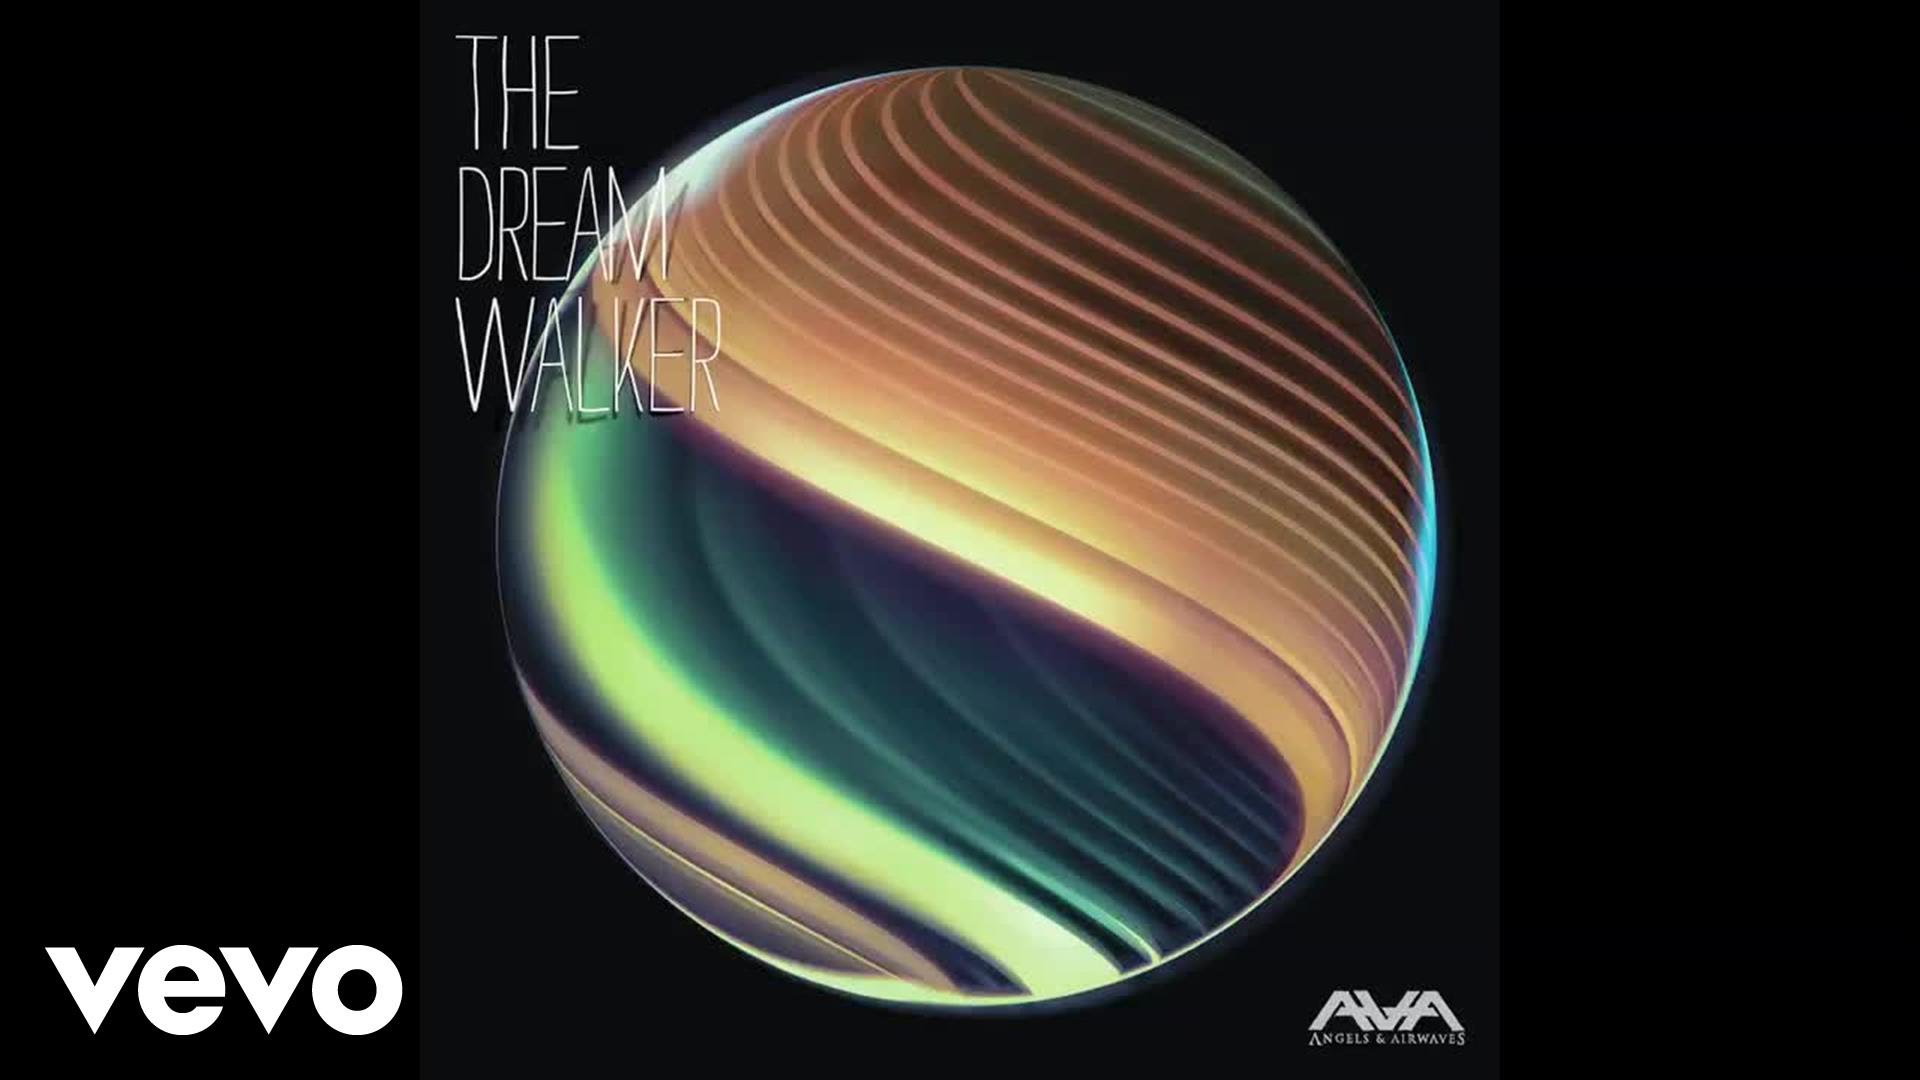 Angels and Airwaves - Anomaly